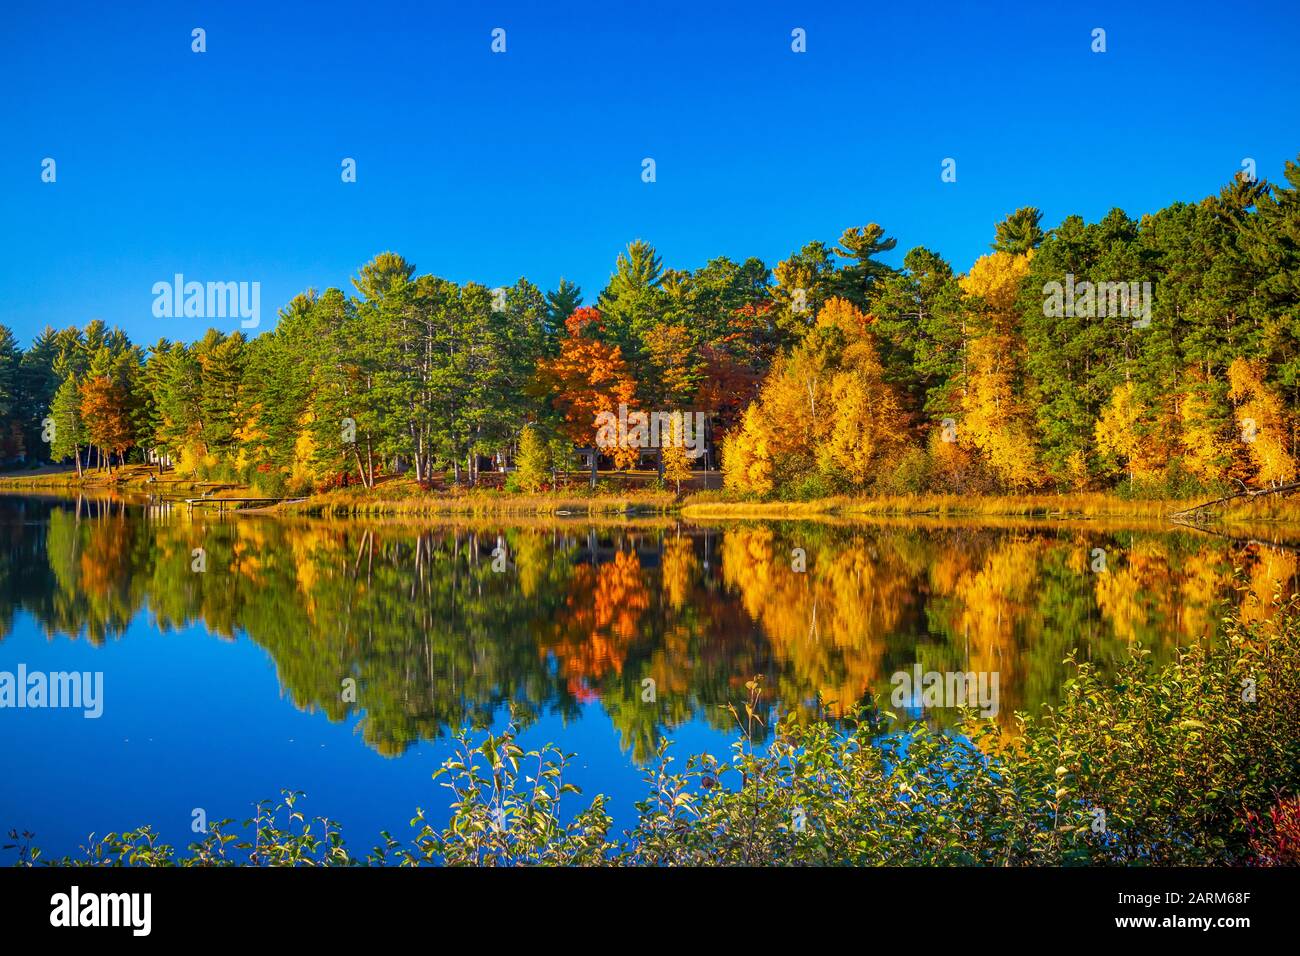 Brilliant fall foliage color in the trees and forests near Minoqua, Wisconsin, USA Stock Photo